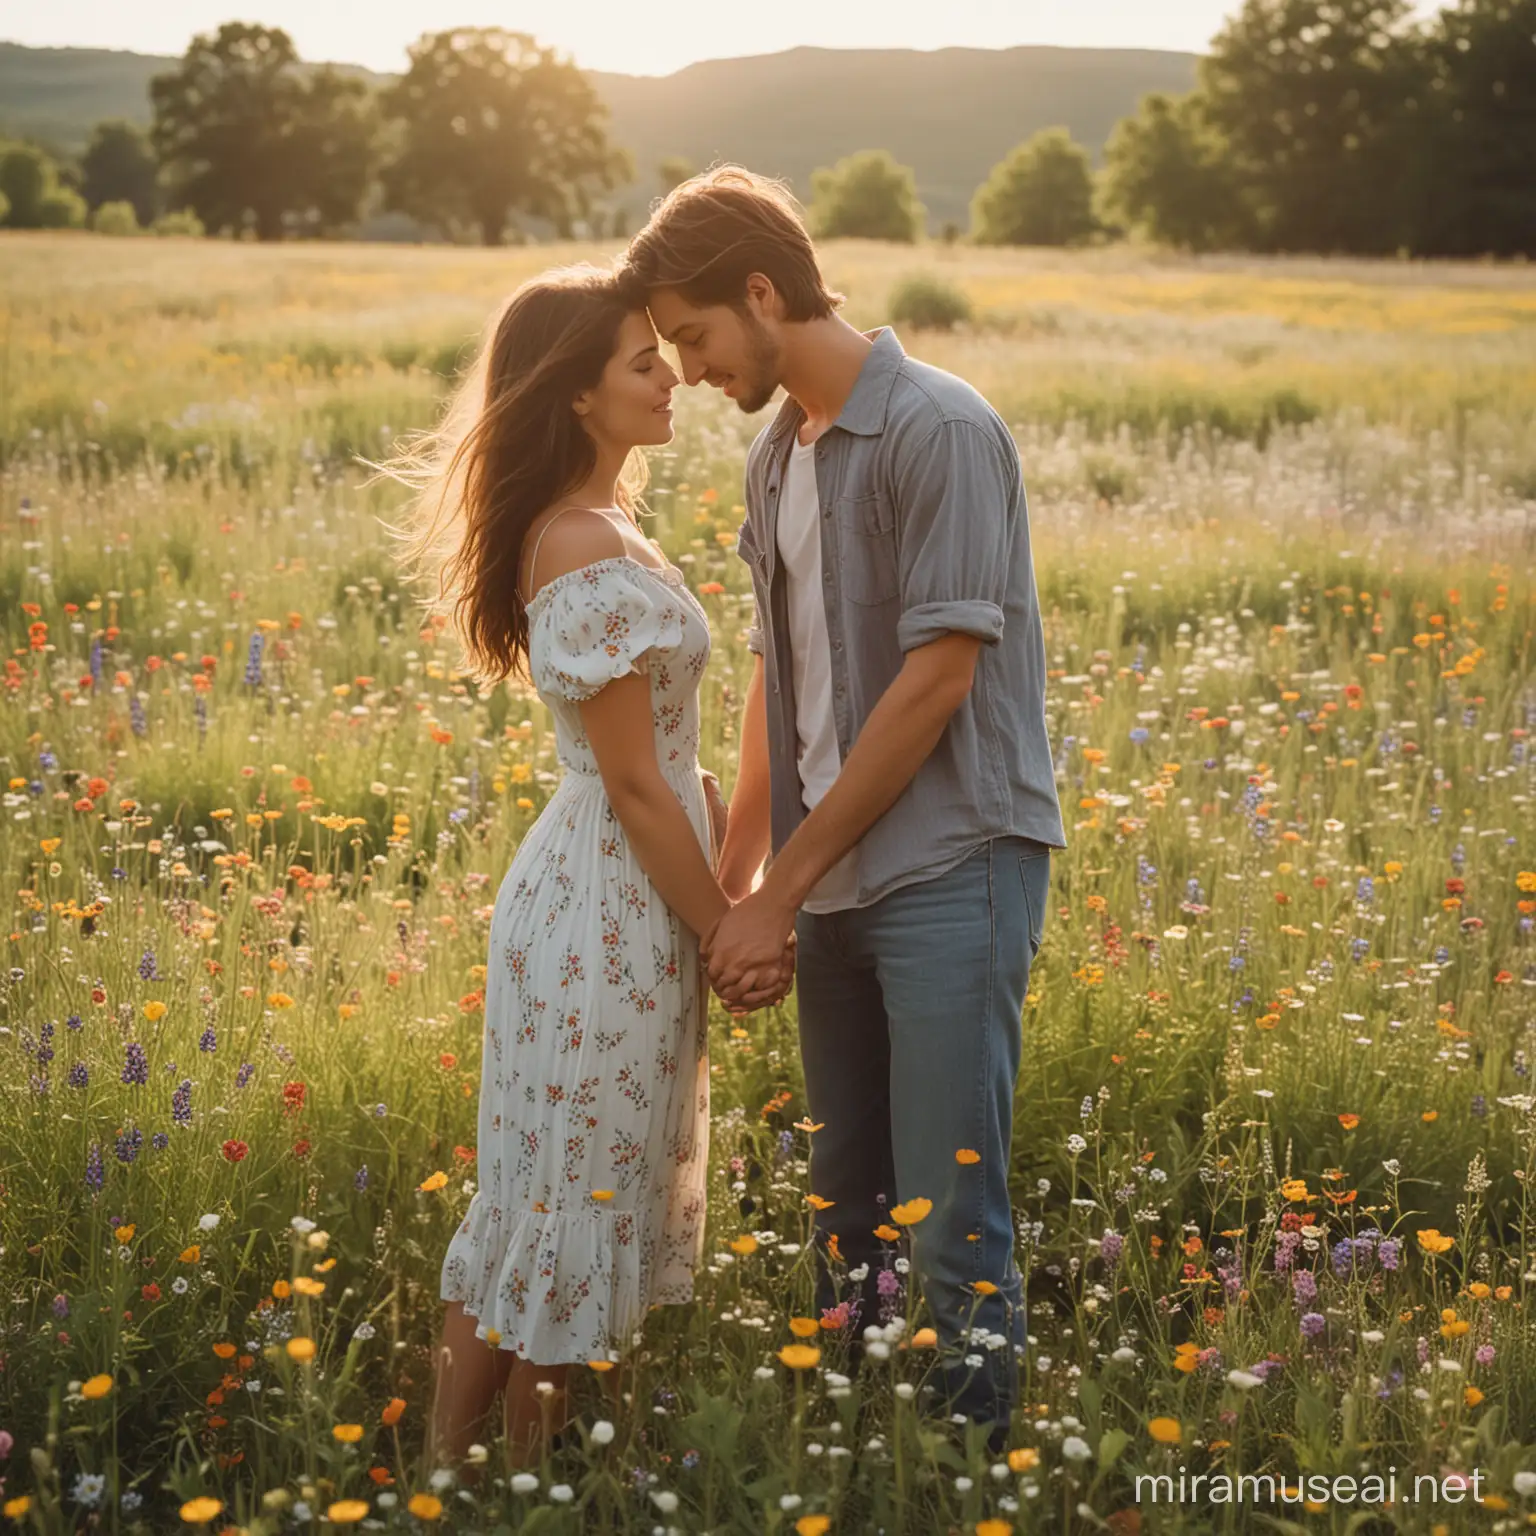 Young Couple in Wildflower Field Enjoying Natural Serenity